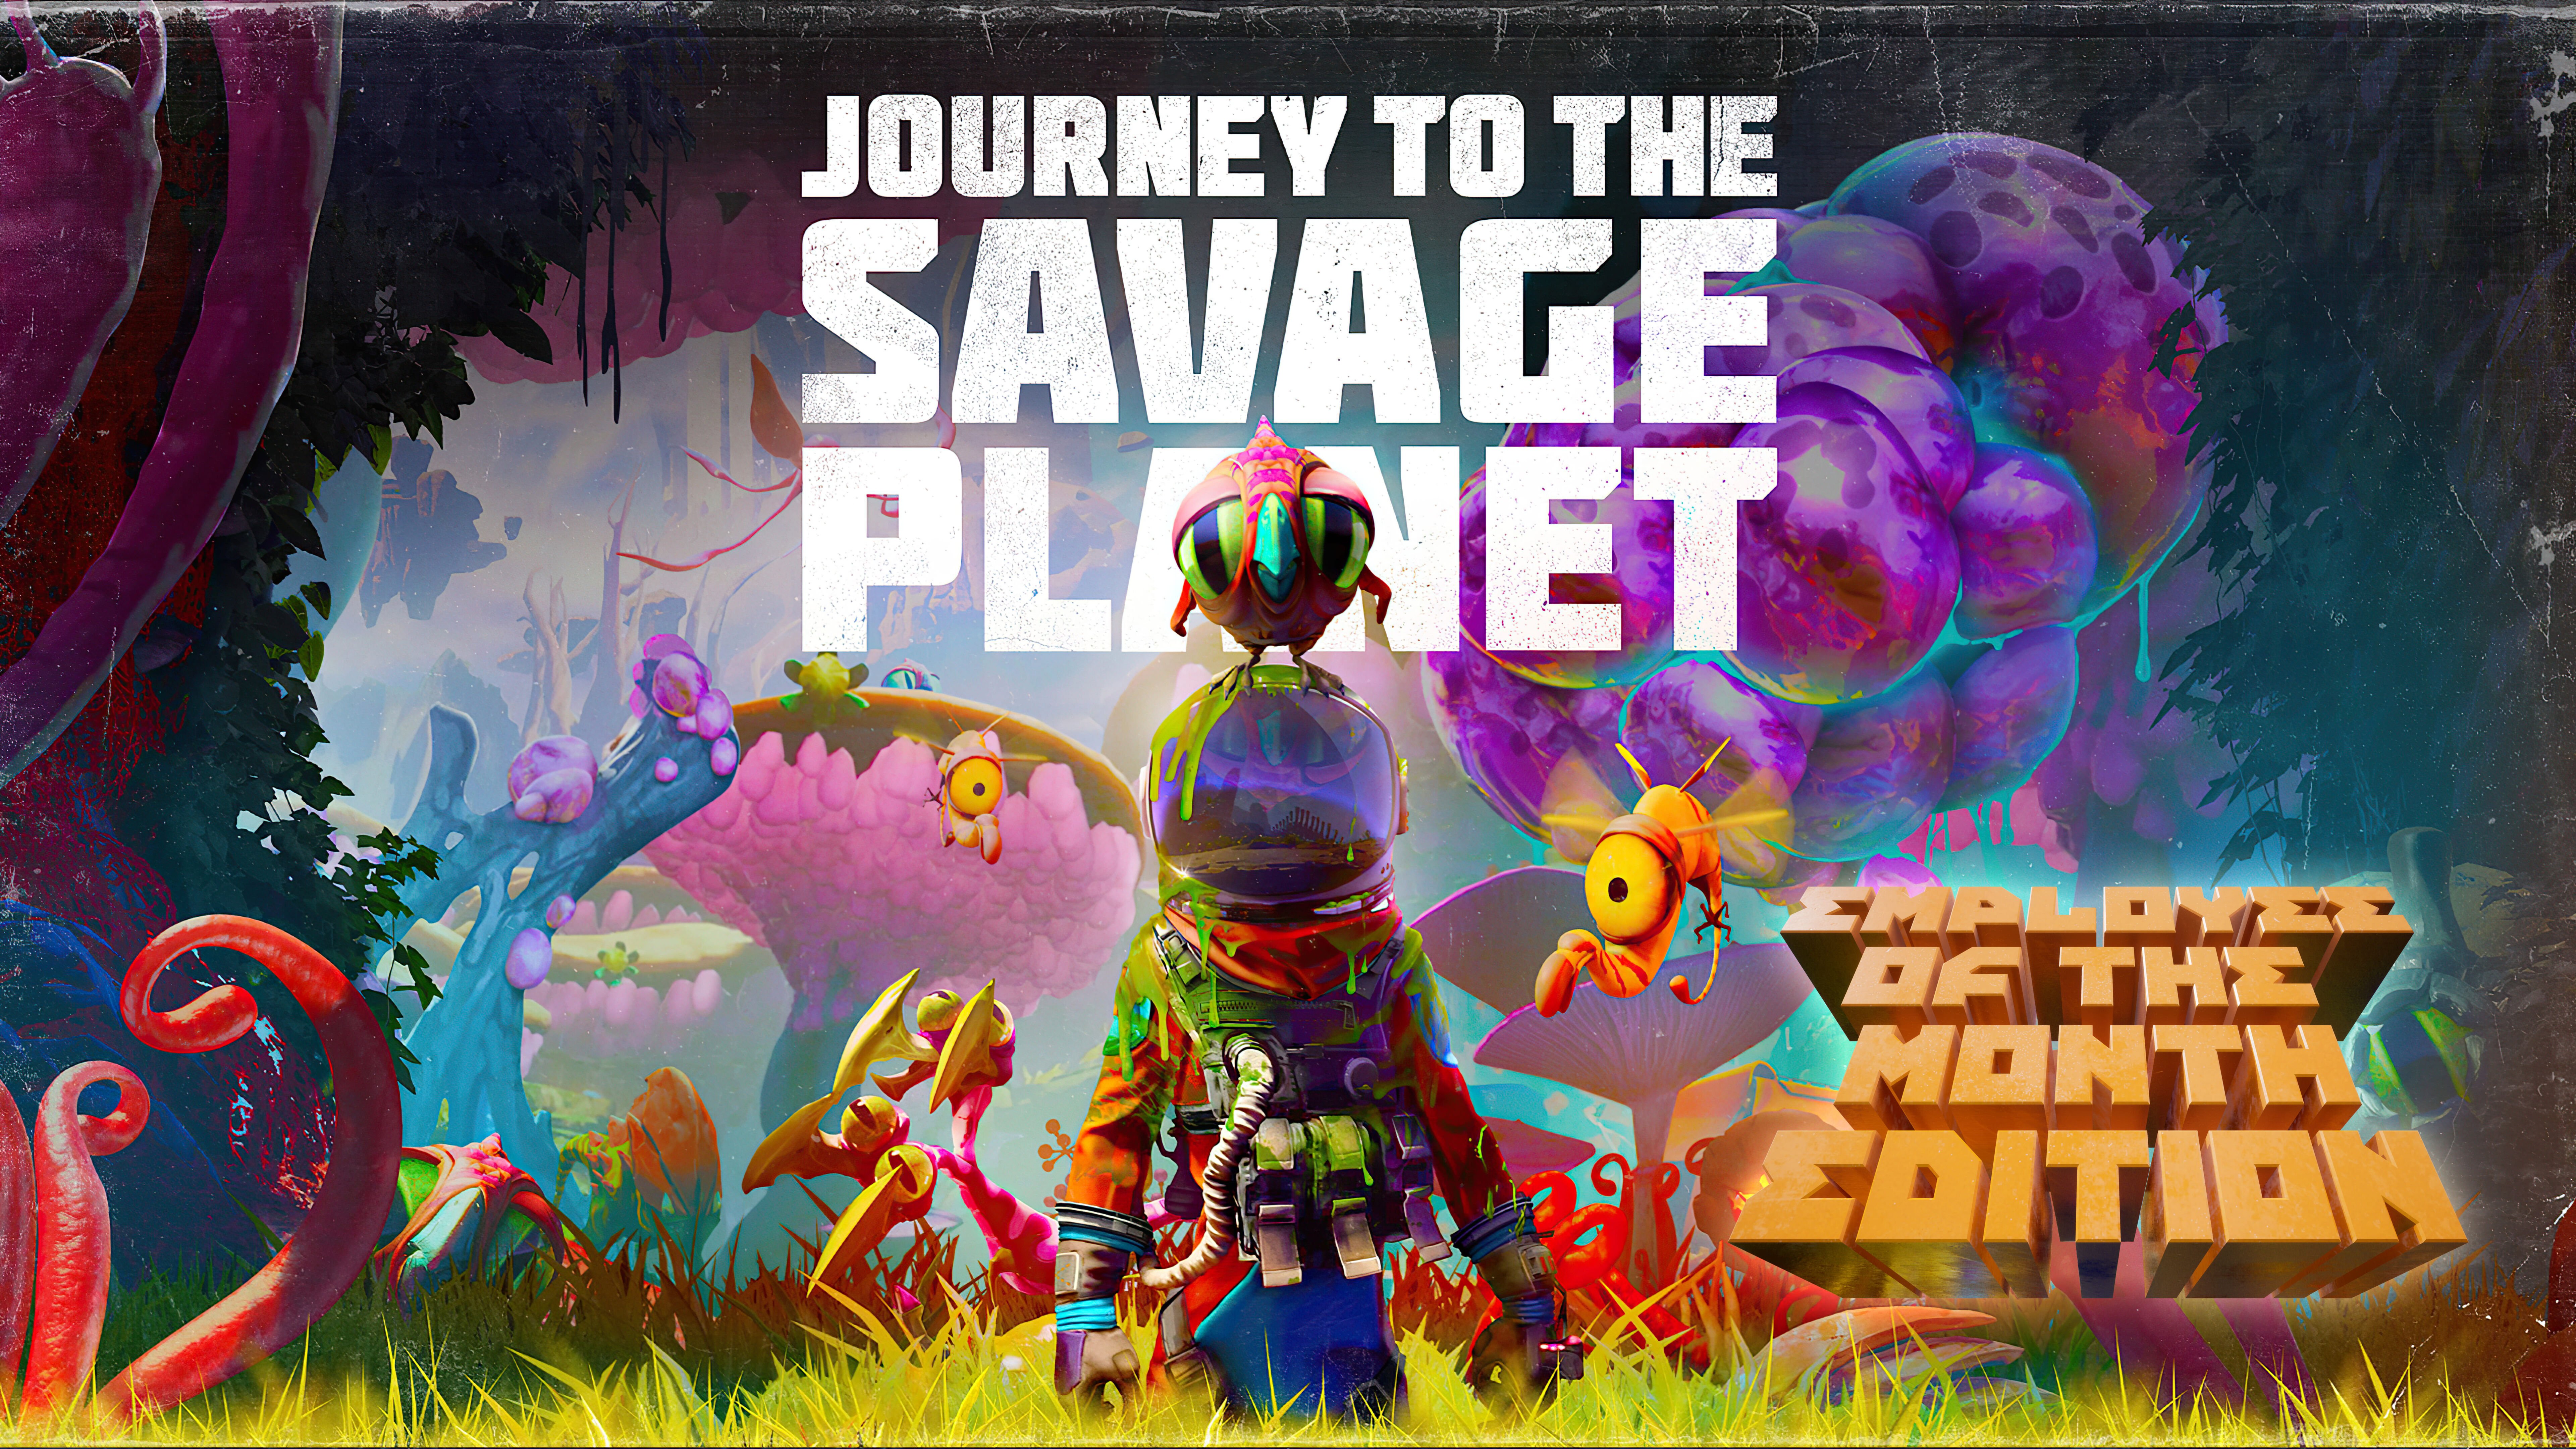 Prime Gaming December Lineup Includes Journey to the Savage Planet